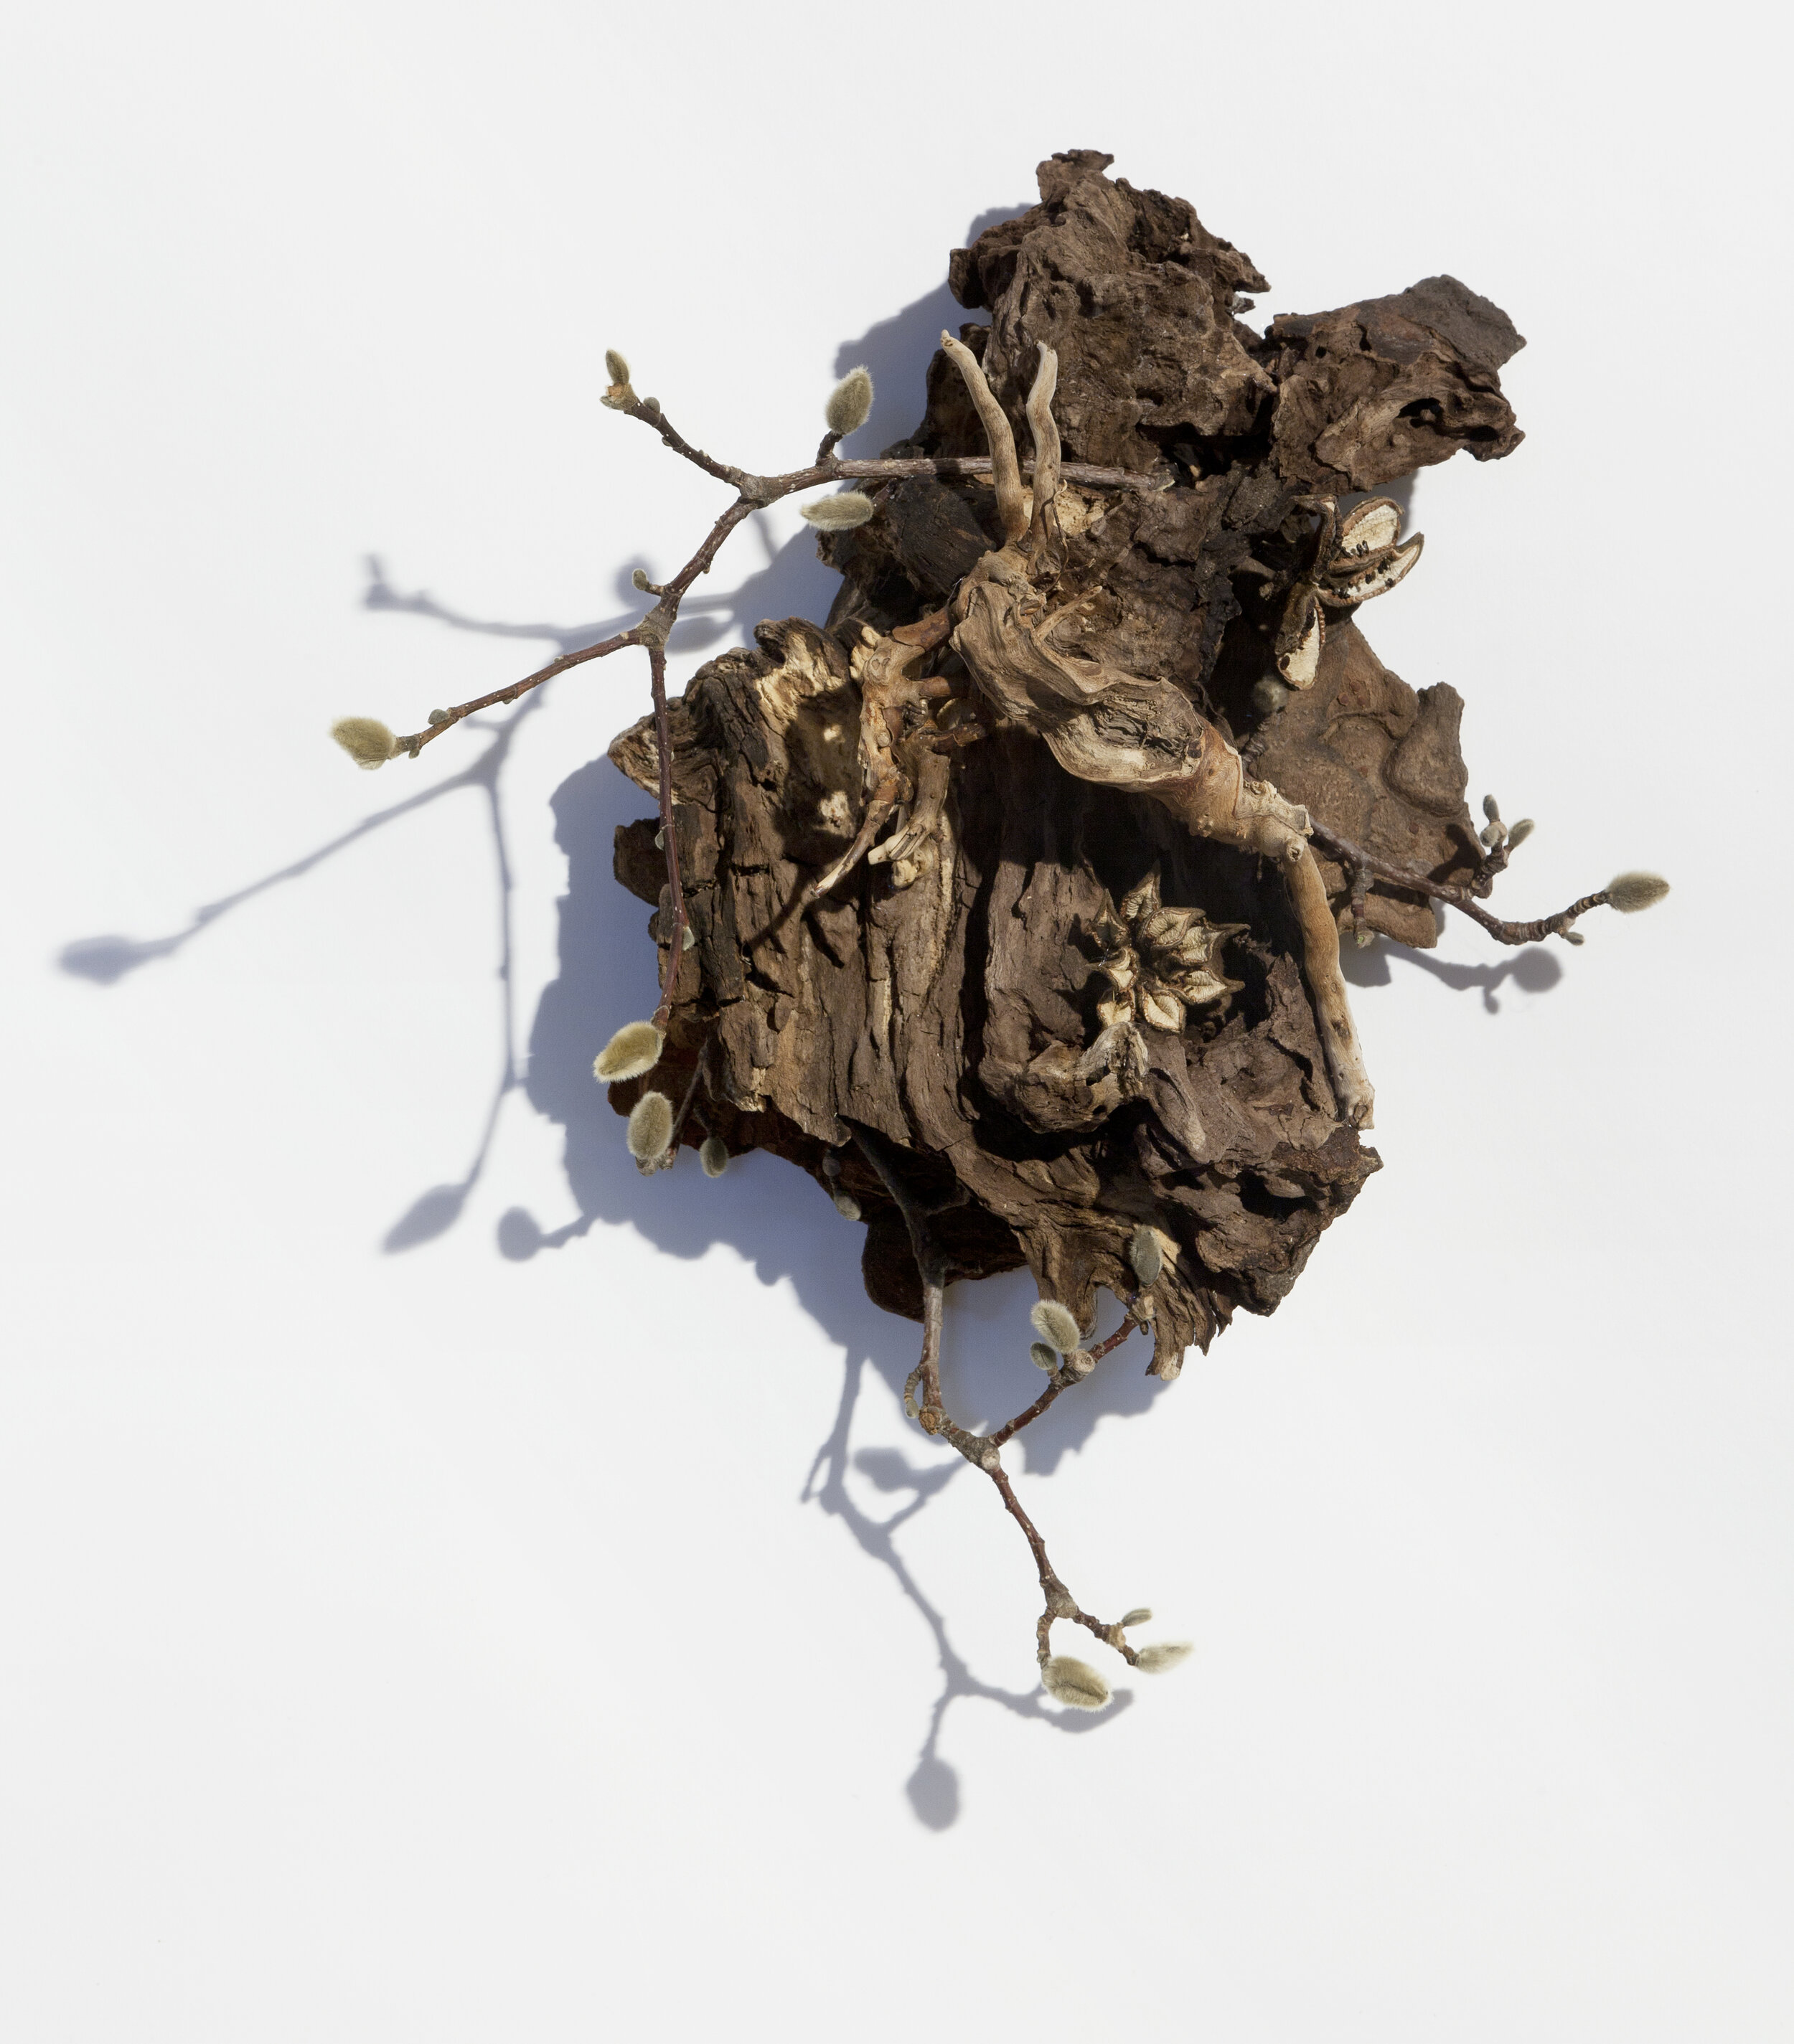    Reveal 2   wood, twigs, 15 x 13 x 5 inches&nbsp; 